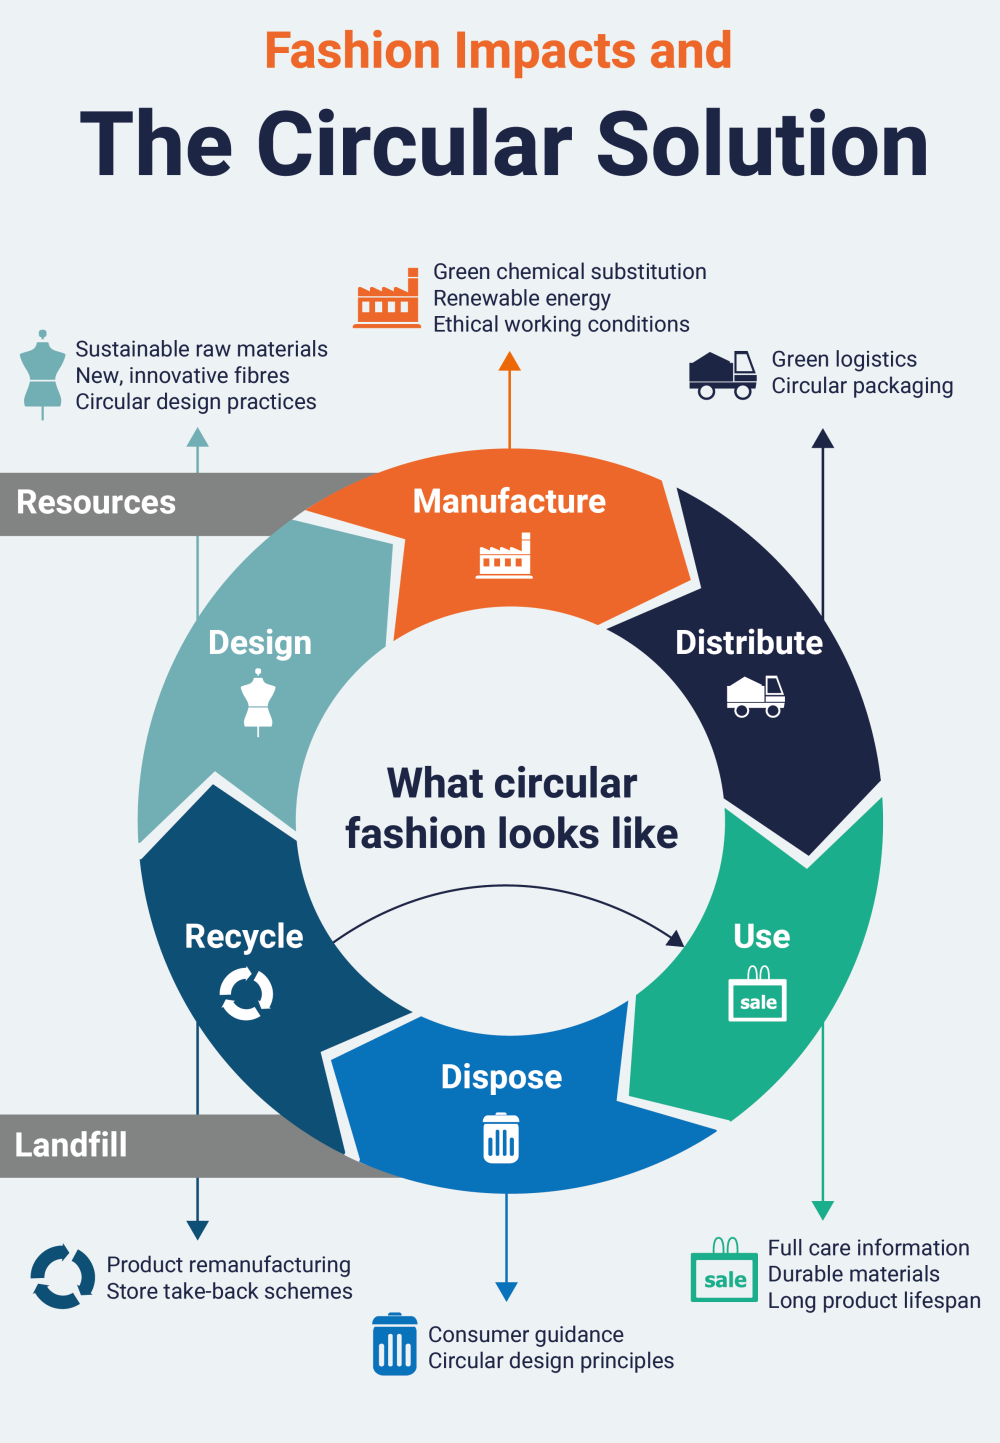  Anthesis , Fashion Impacts and The Circular Solution  